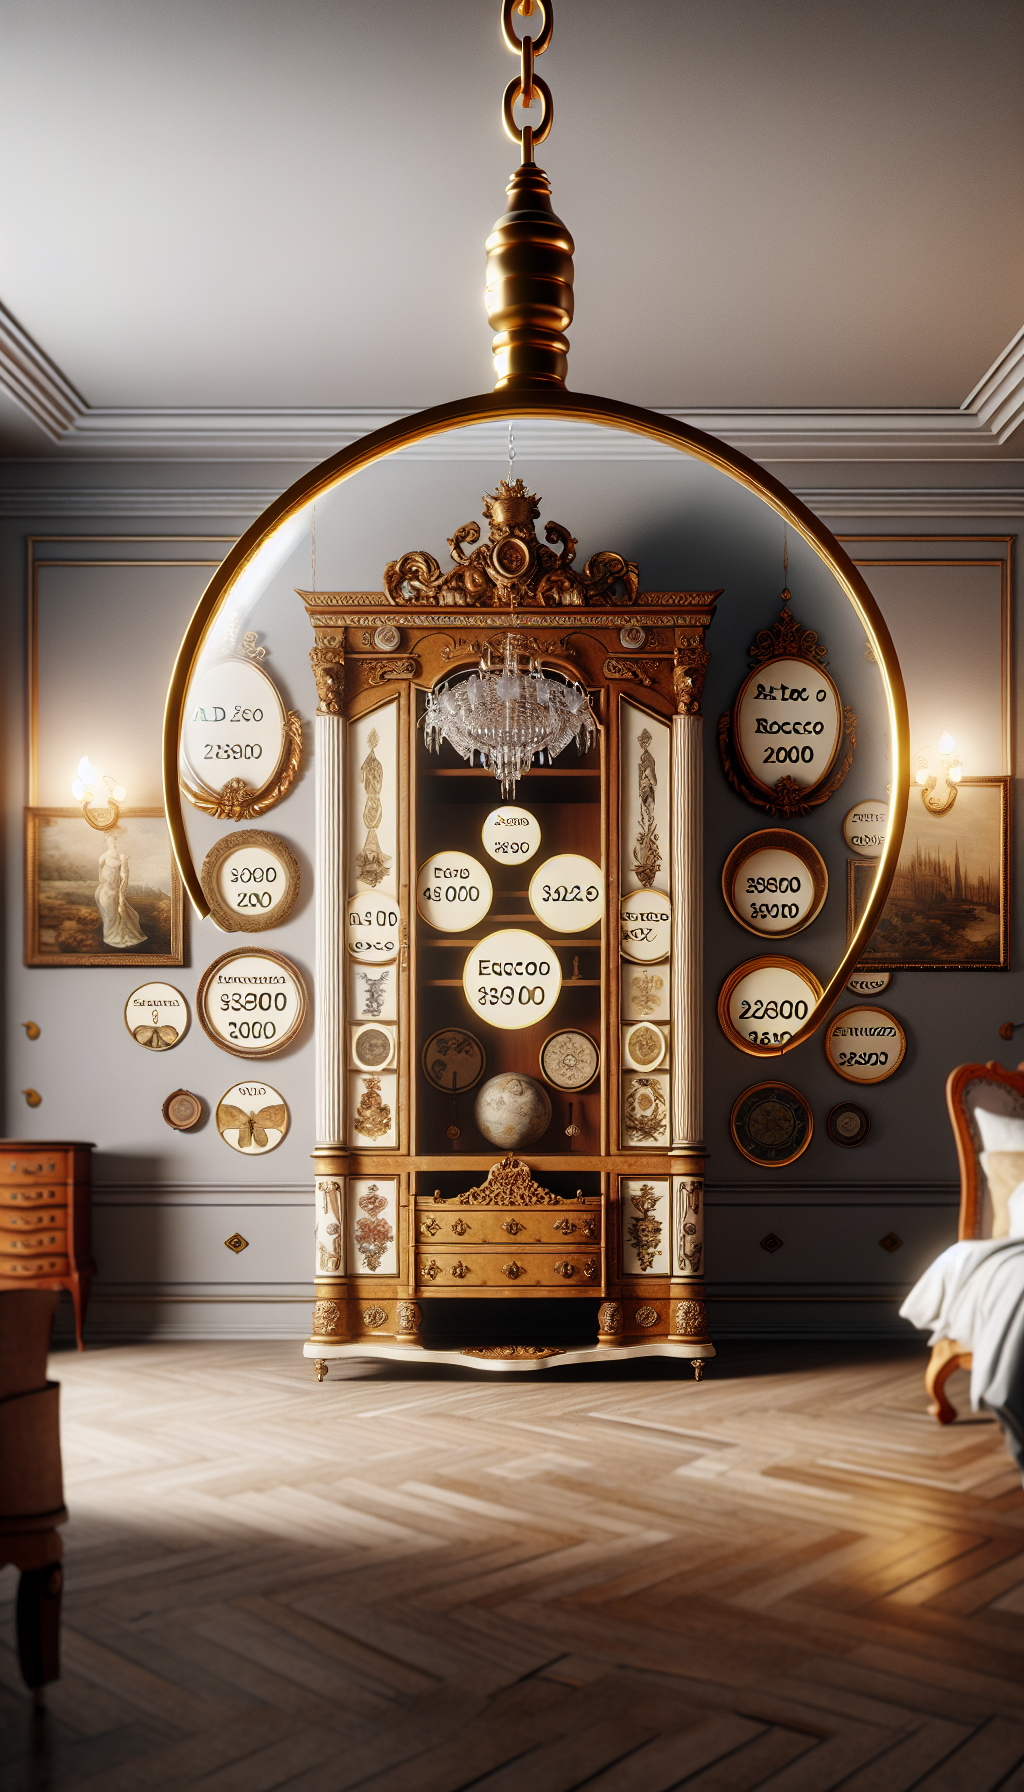 An intricately adorned Victorian armoire stands amidst a gallery of time-frozen bedroom vignettes; each alcove represents a distinct era, marked by a hanging golden plaque denoting its period like Art Deco, Rococo, and Renaissance. A magnifying glass hovers over the armoire, with reflected appraisal values shimmering inside its lens, symbolizing the depth of history and worth of each antique ensemble.